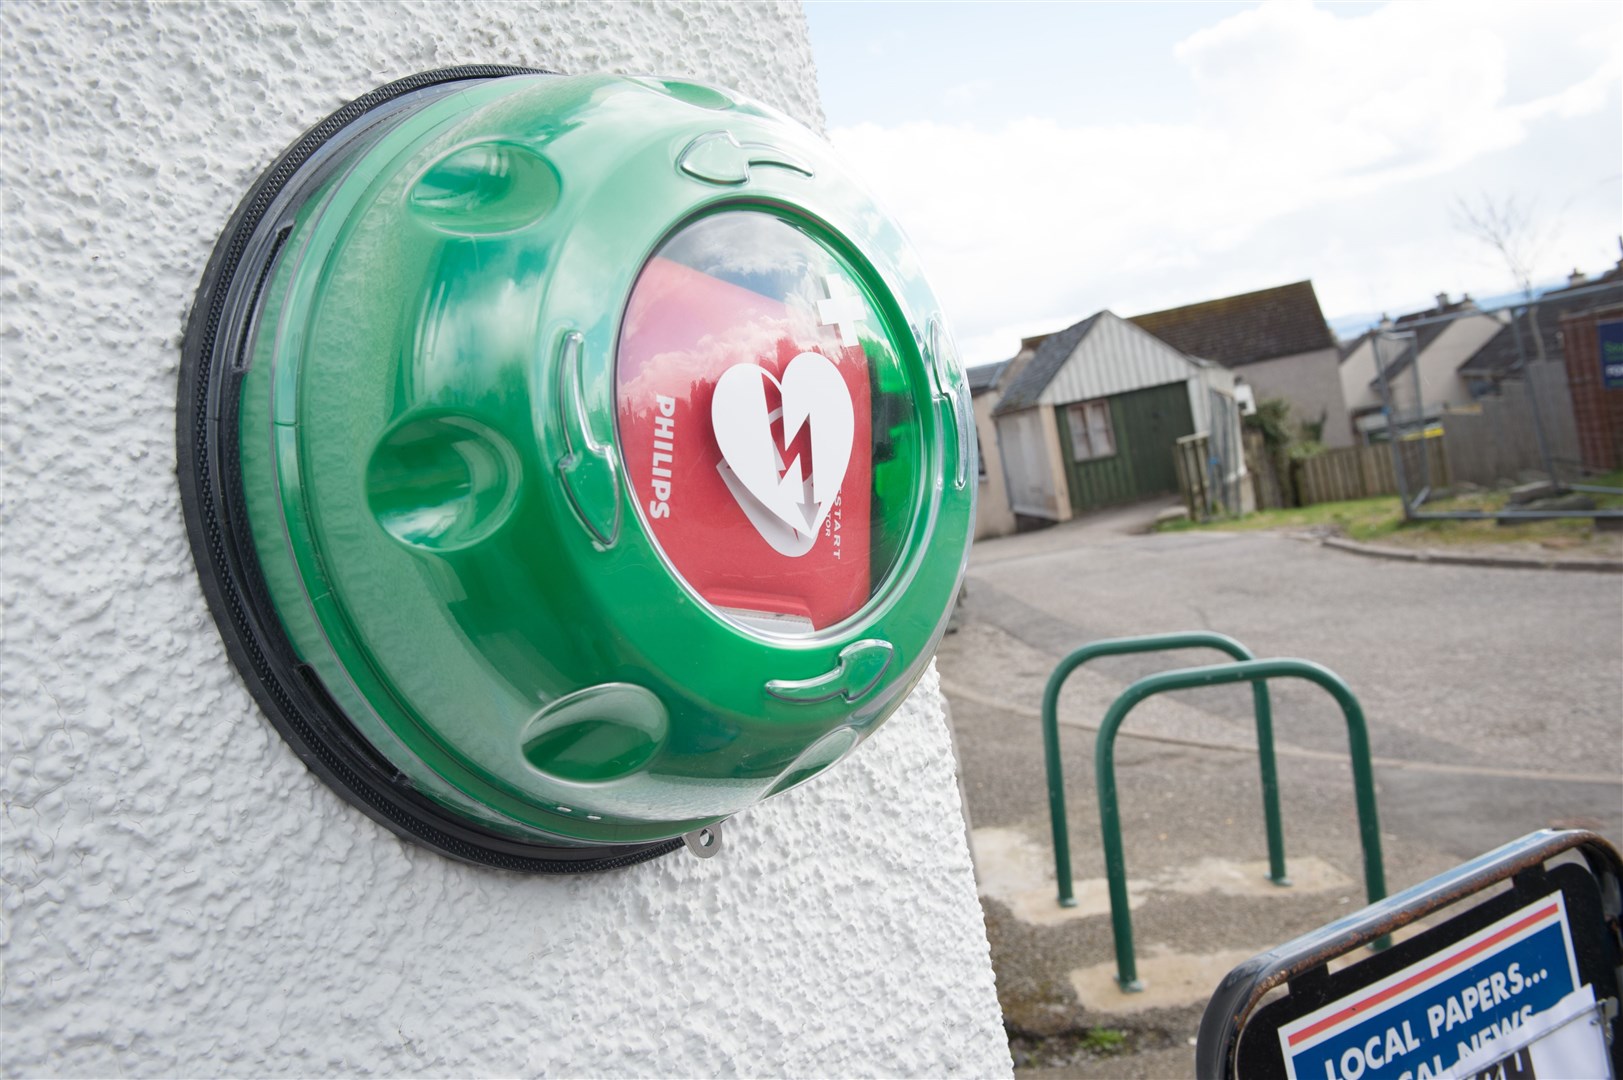 The campaign aims to have existing defibrillators registered so that ambulance staff can direct members of the public towards nearest units in an emergency.